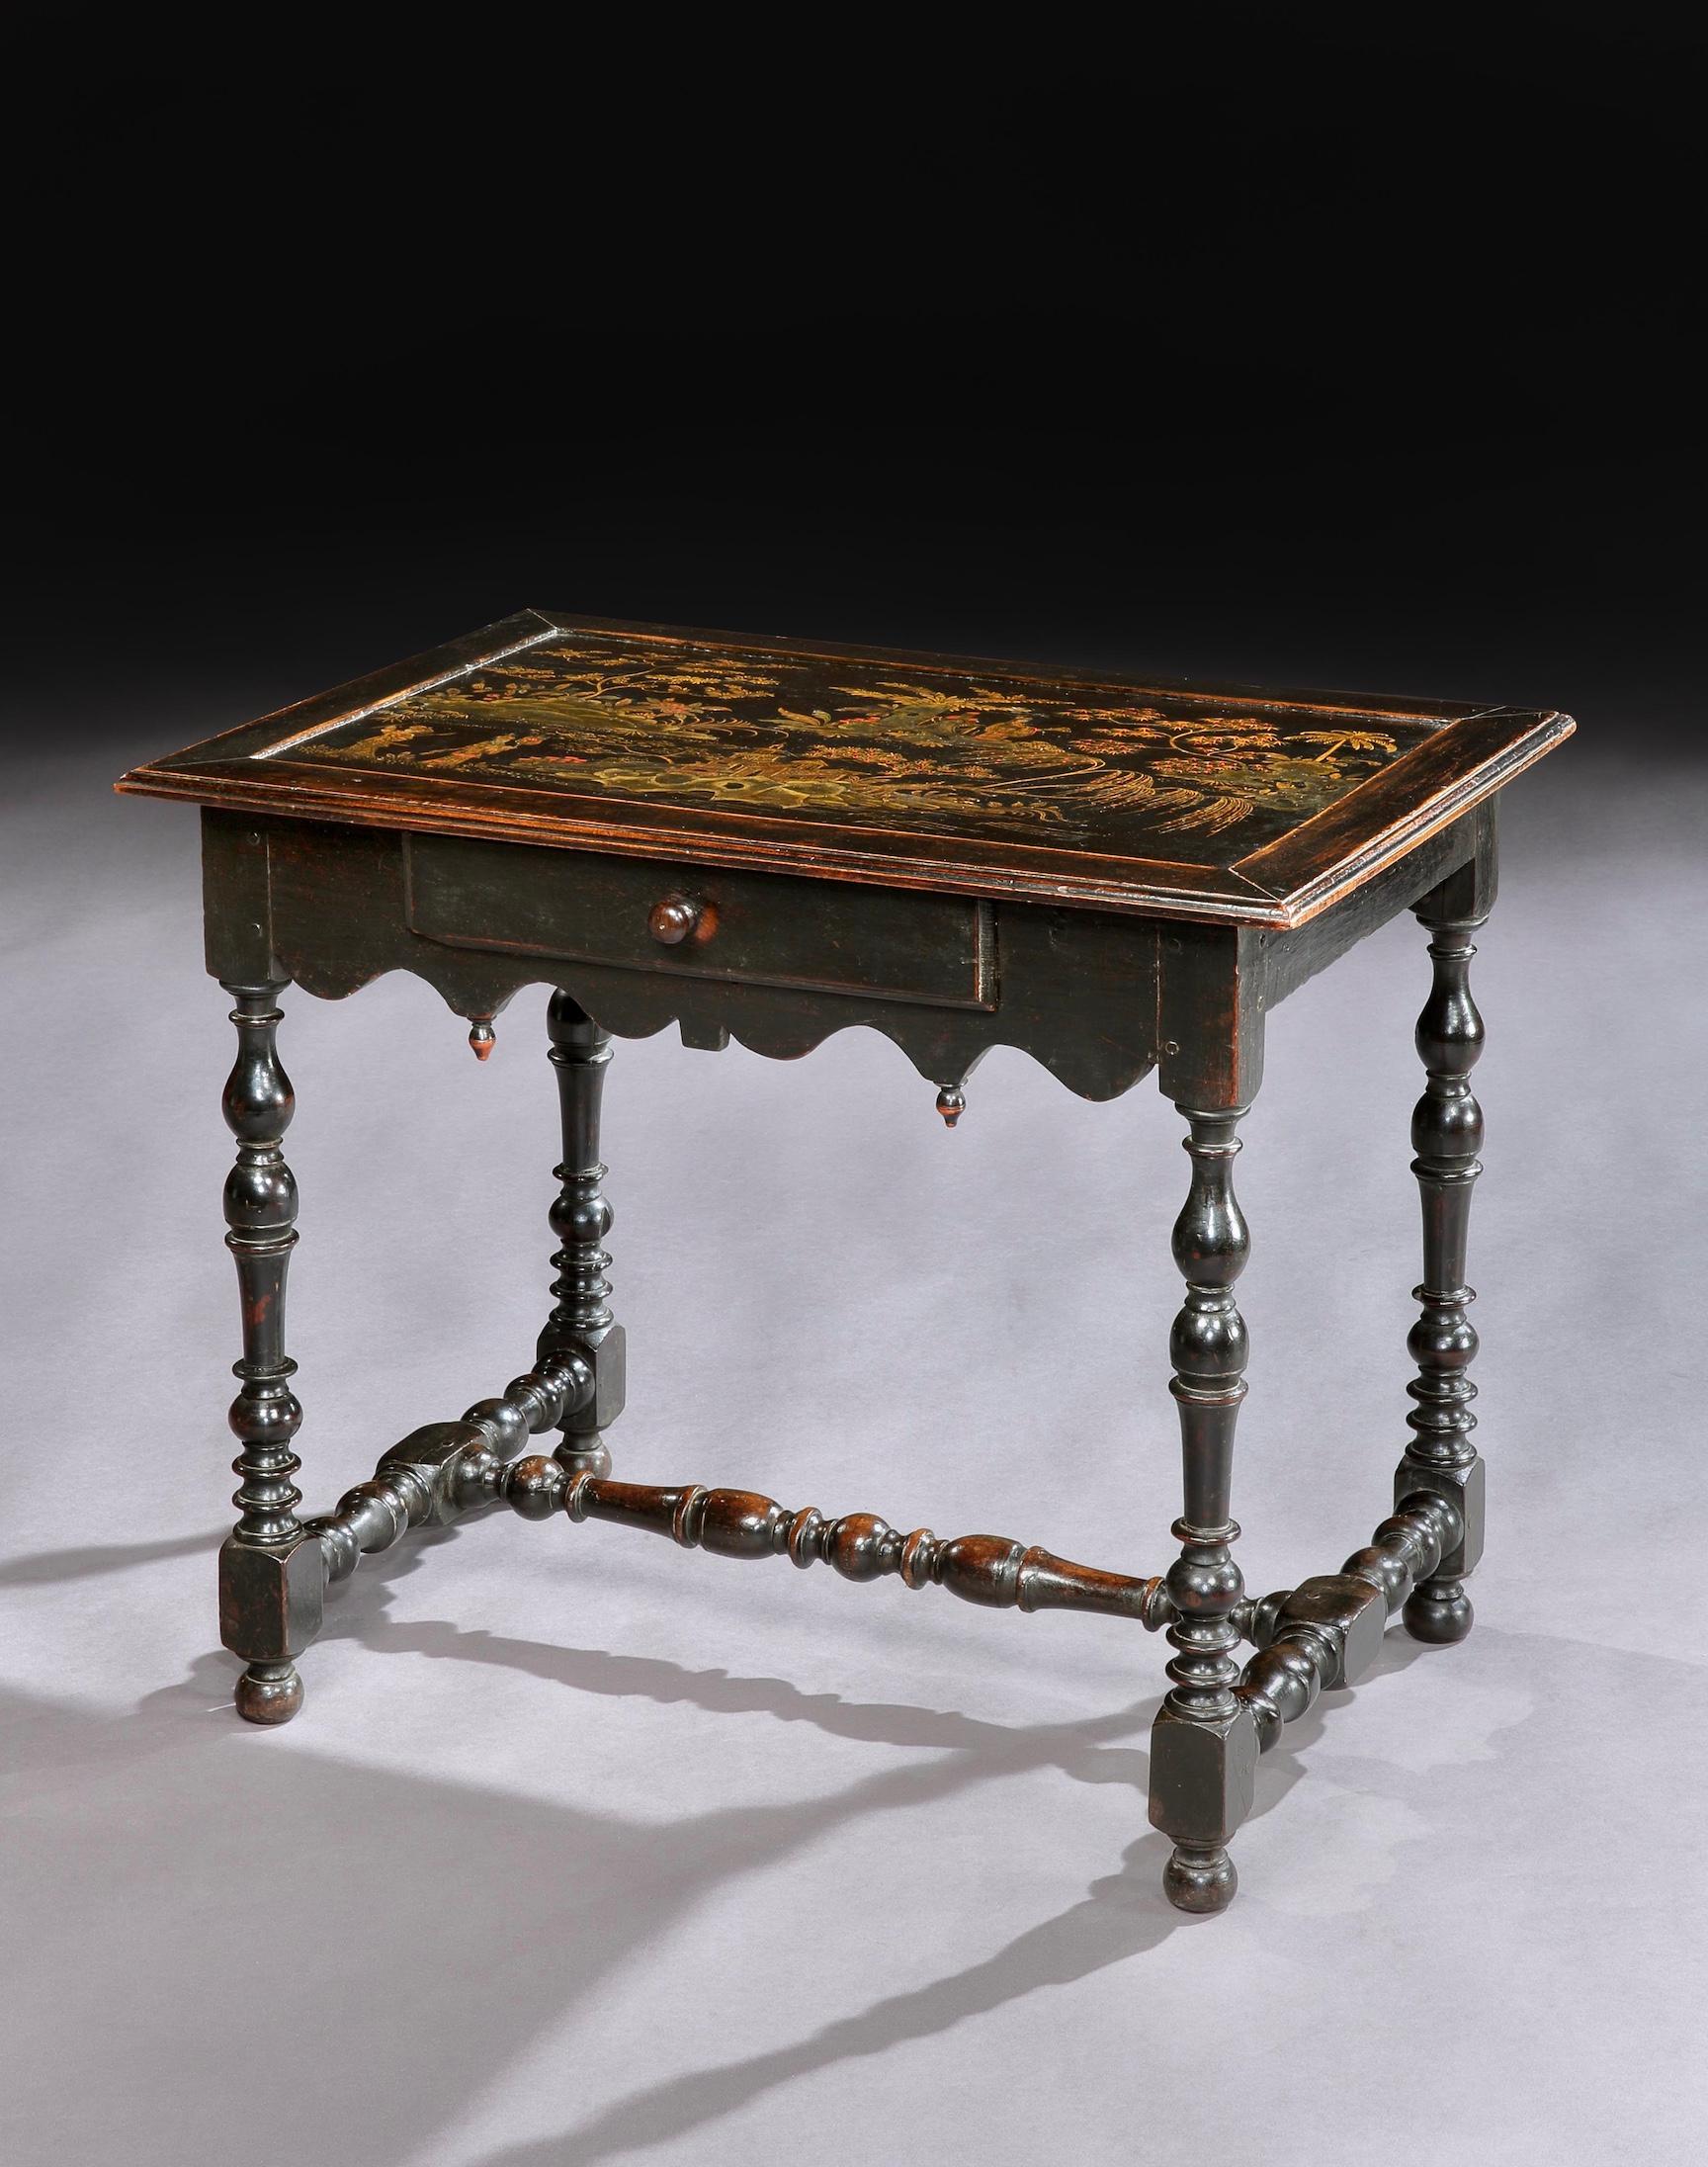 A rare early 18th century ebonised side table, the rectangular top with moulded edge inset with a rare panel of chinoiserie decoration of gilded highlights on a black japanned background, all above a single frieze drawer with pull handle, standing